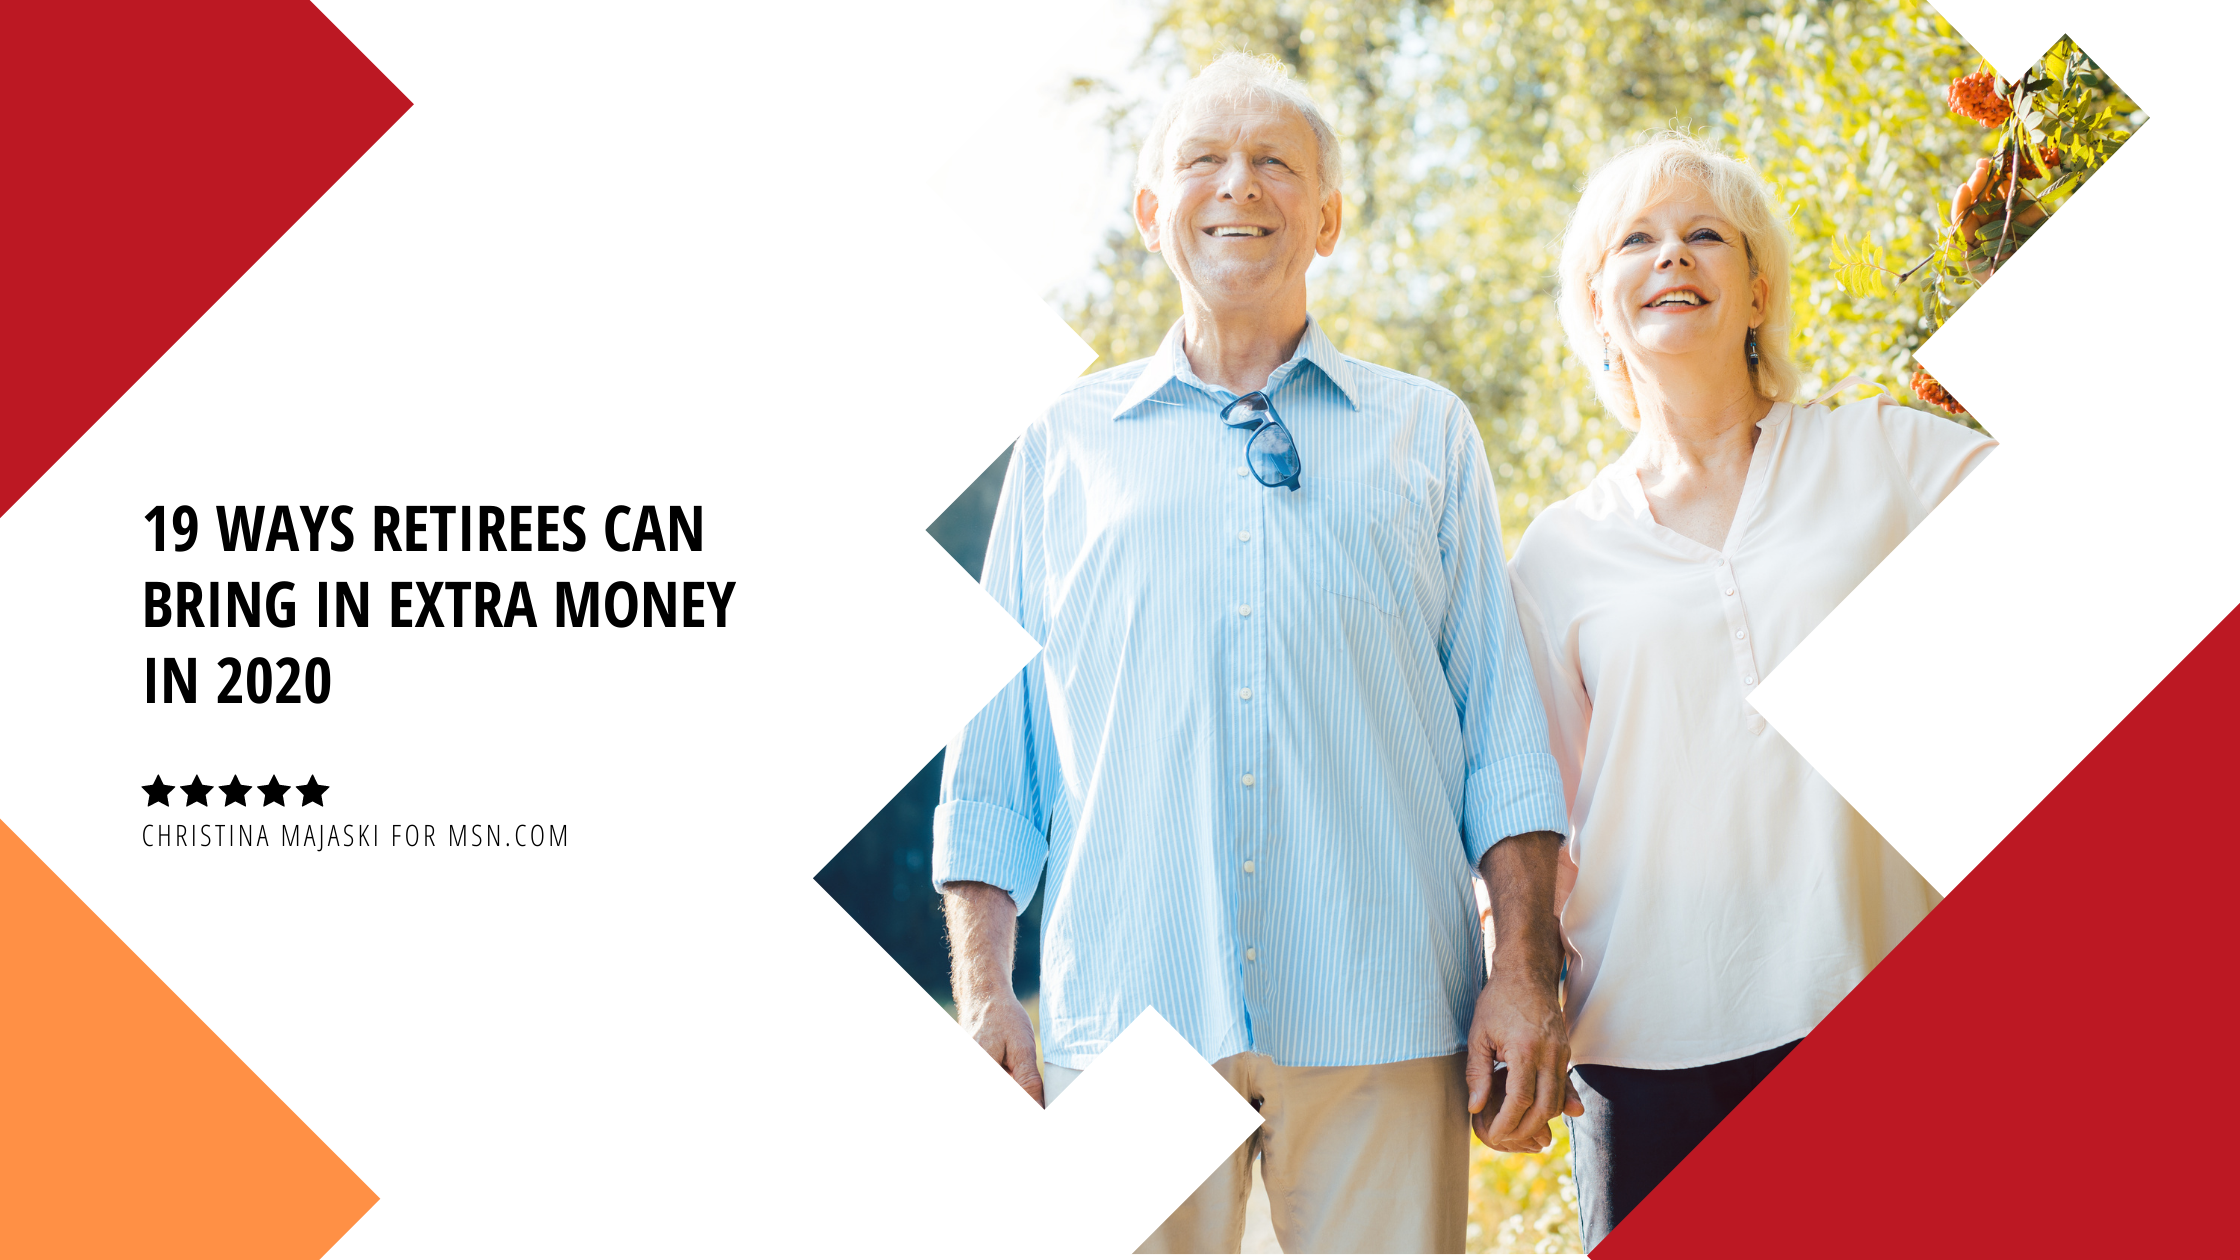 19 Ways Retirees Can Bring in Extra Money in 2020